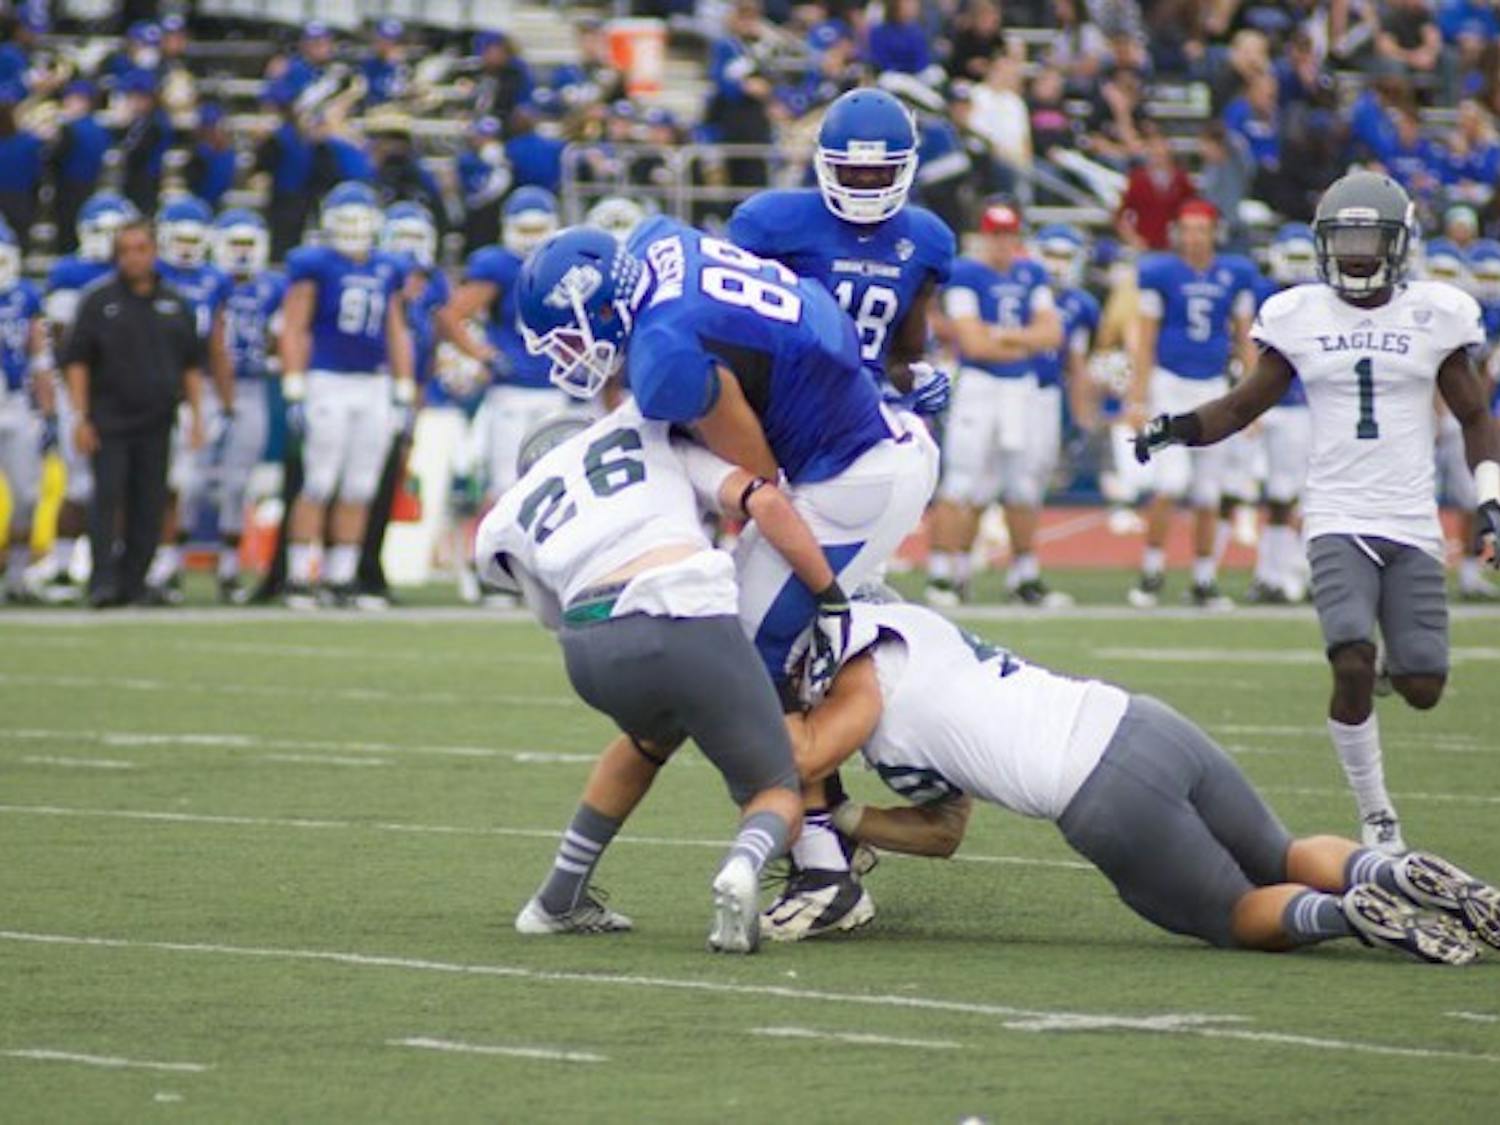 Junior tight end Matt Weiser is tackled by two Eastern Michigan defenders in the Bulls’ 42-14 victory on the Eagles at UB Stadium on Oct. 5 2013.&nbsp;